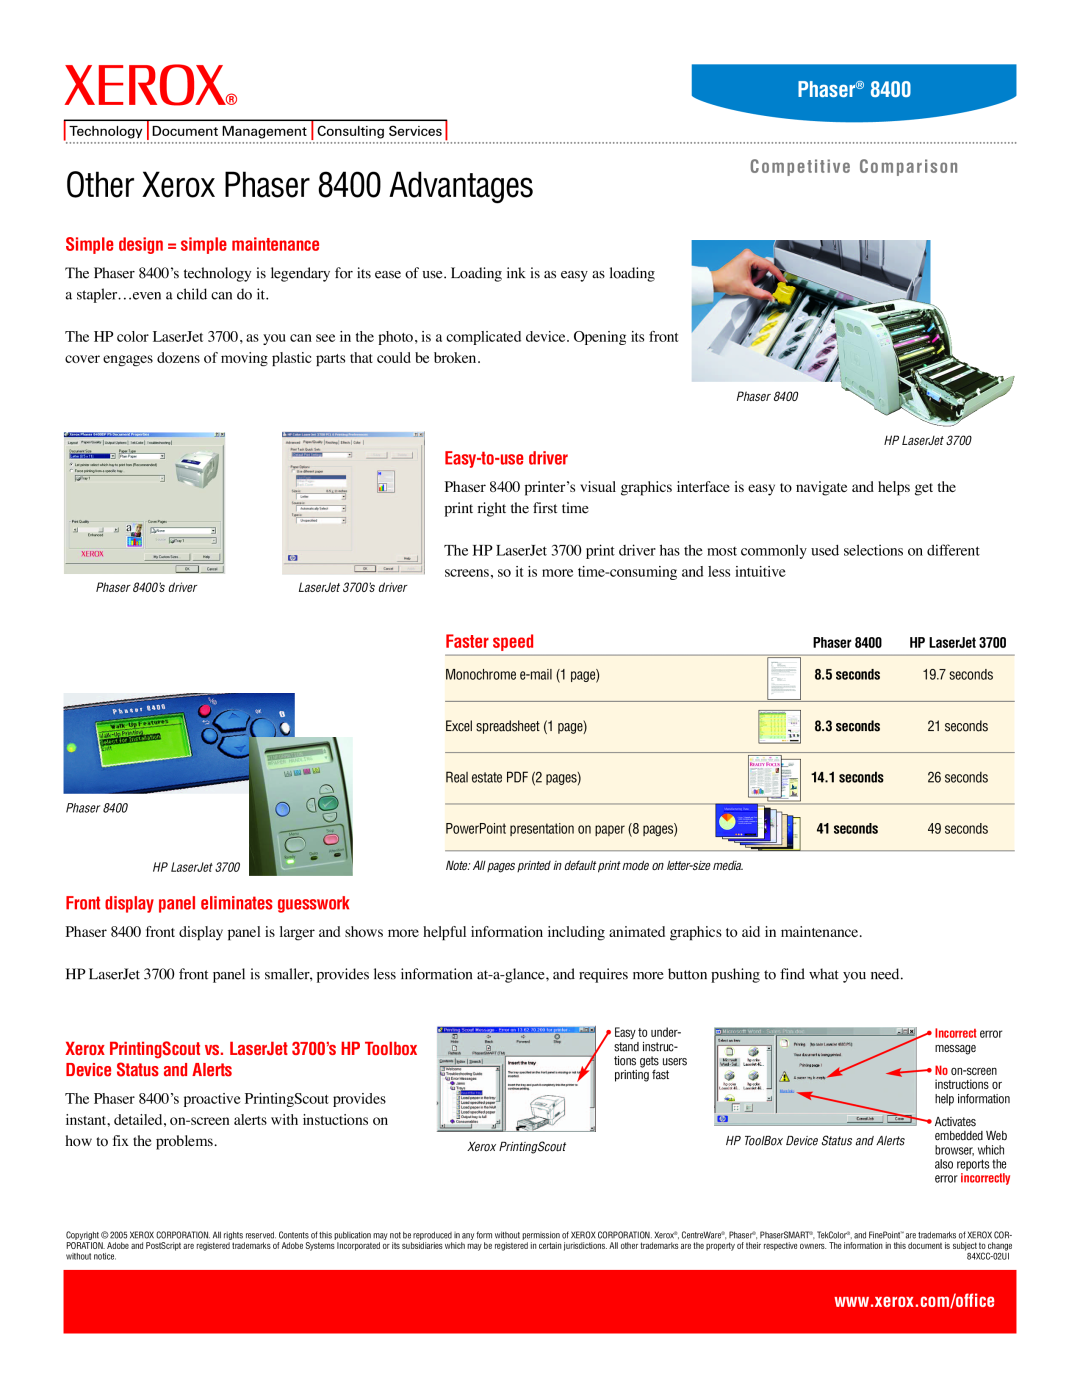 Xerox 8400DX Other Xerox Phaser 8400 Advantages, Competitive Comparison, Simple design = simple maintenance, Faster speed 